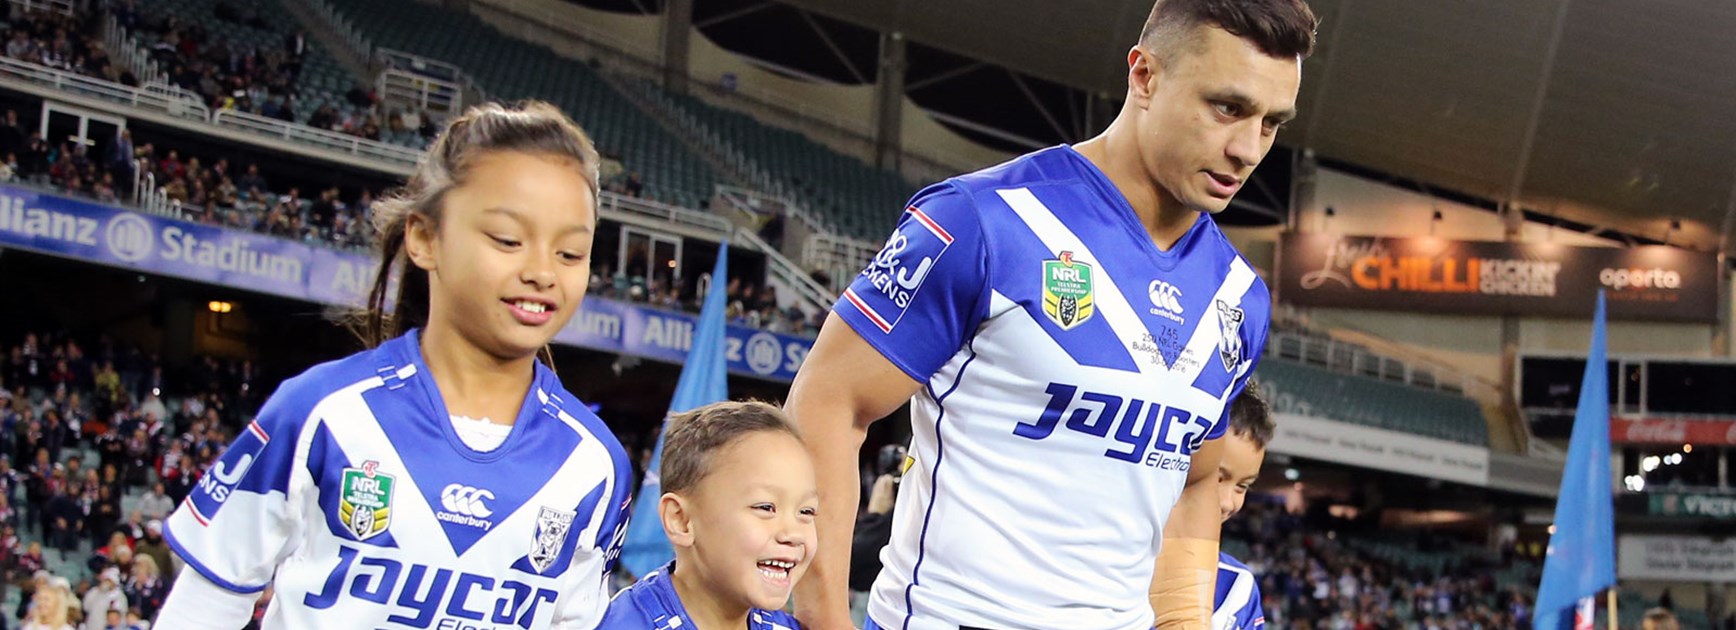 Bulldogs winger Sam Perrett made his 250th NRL appearance against his former club the Roosters in Round 17.